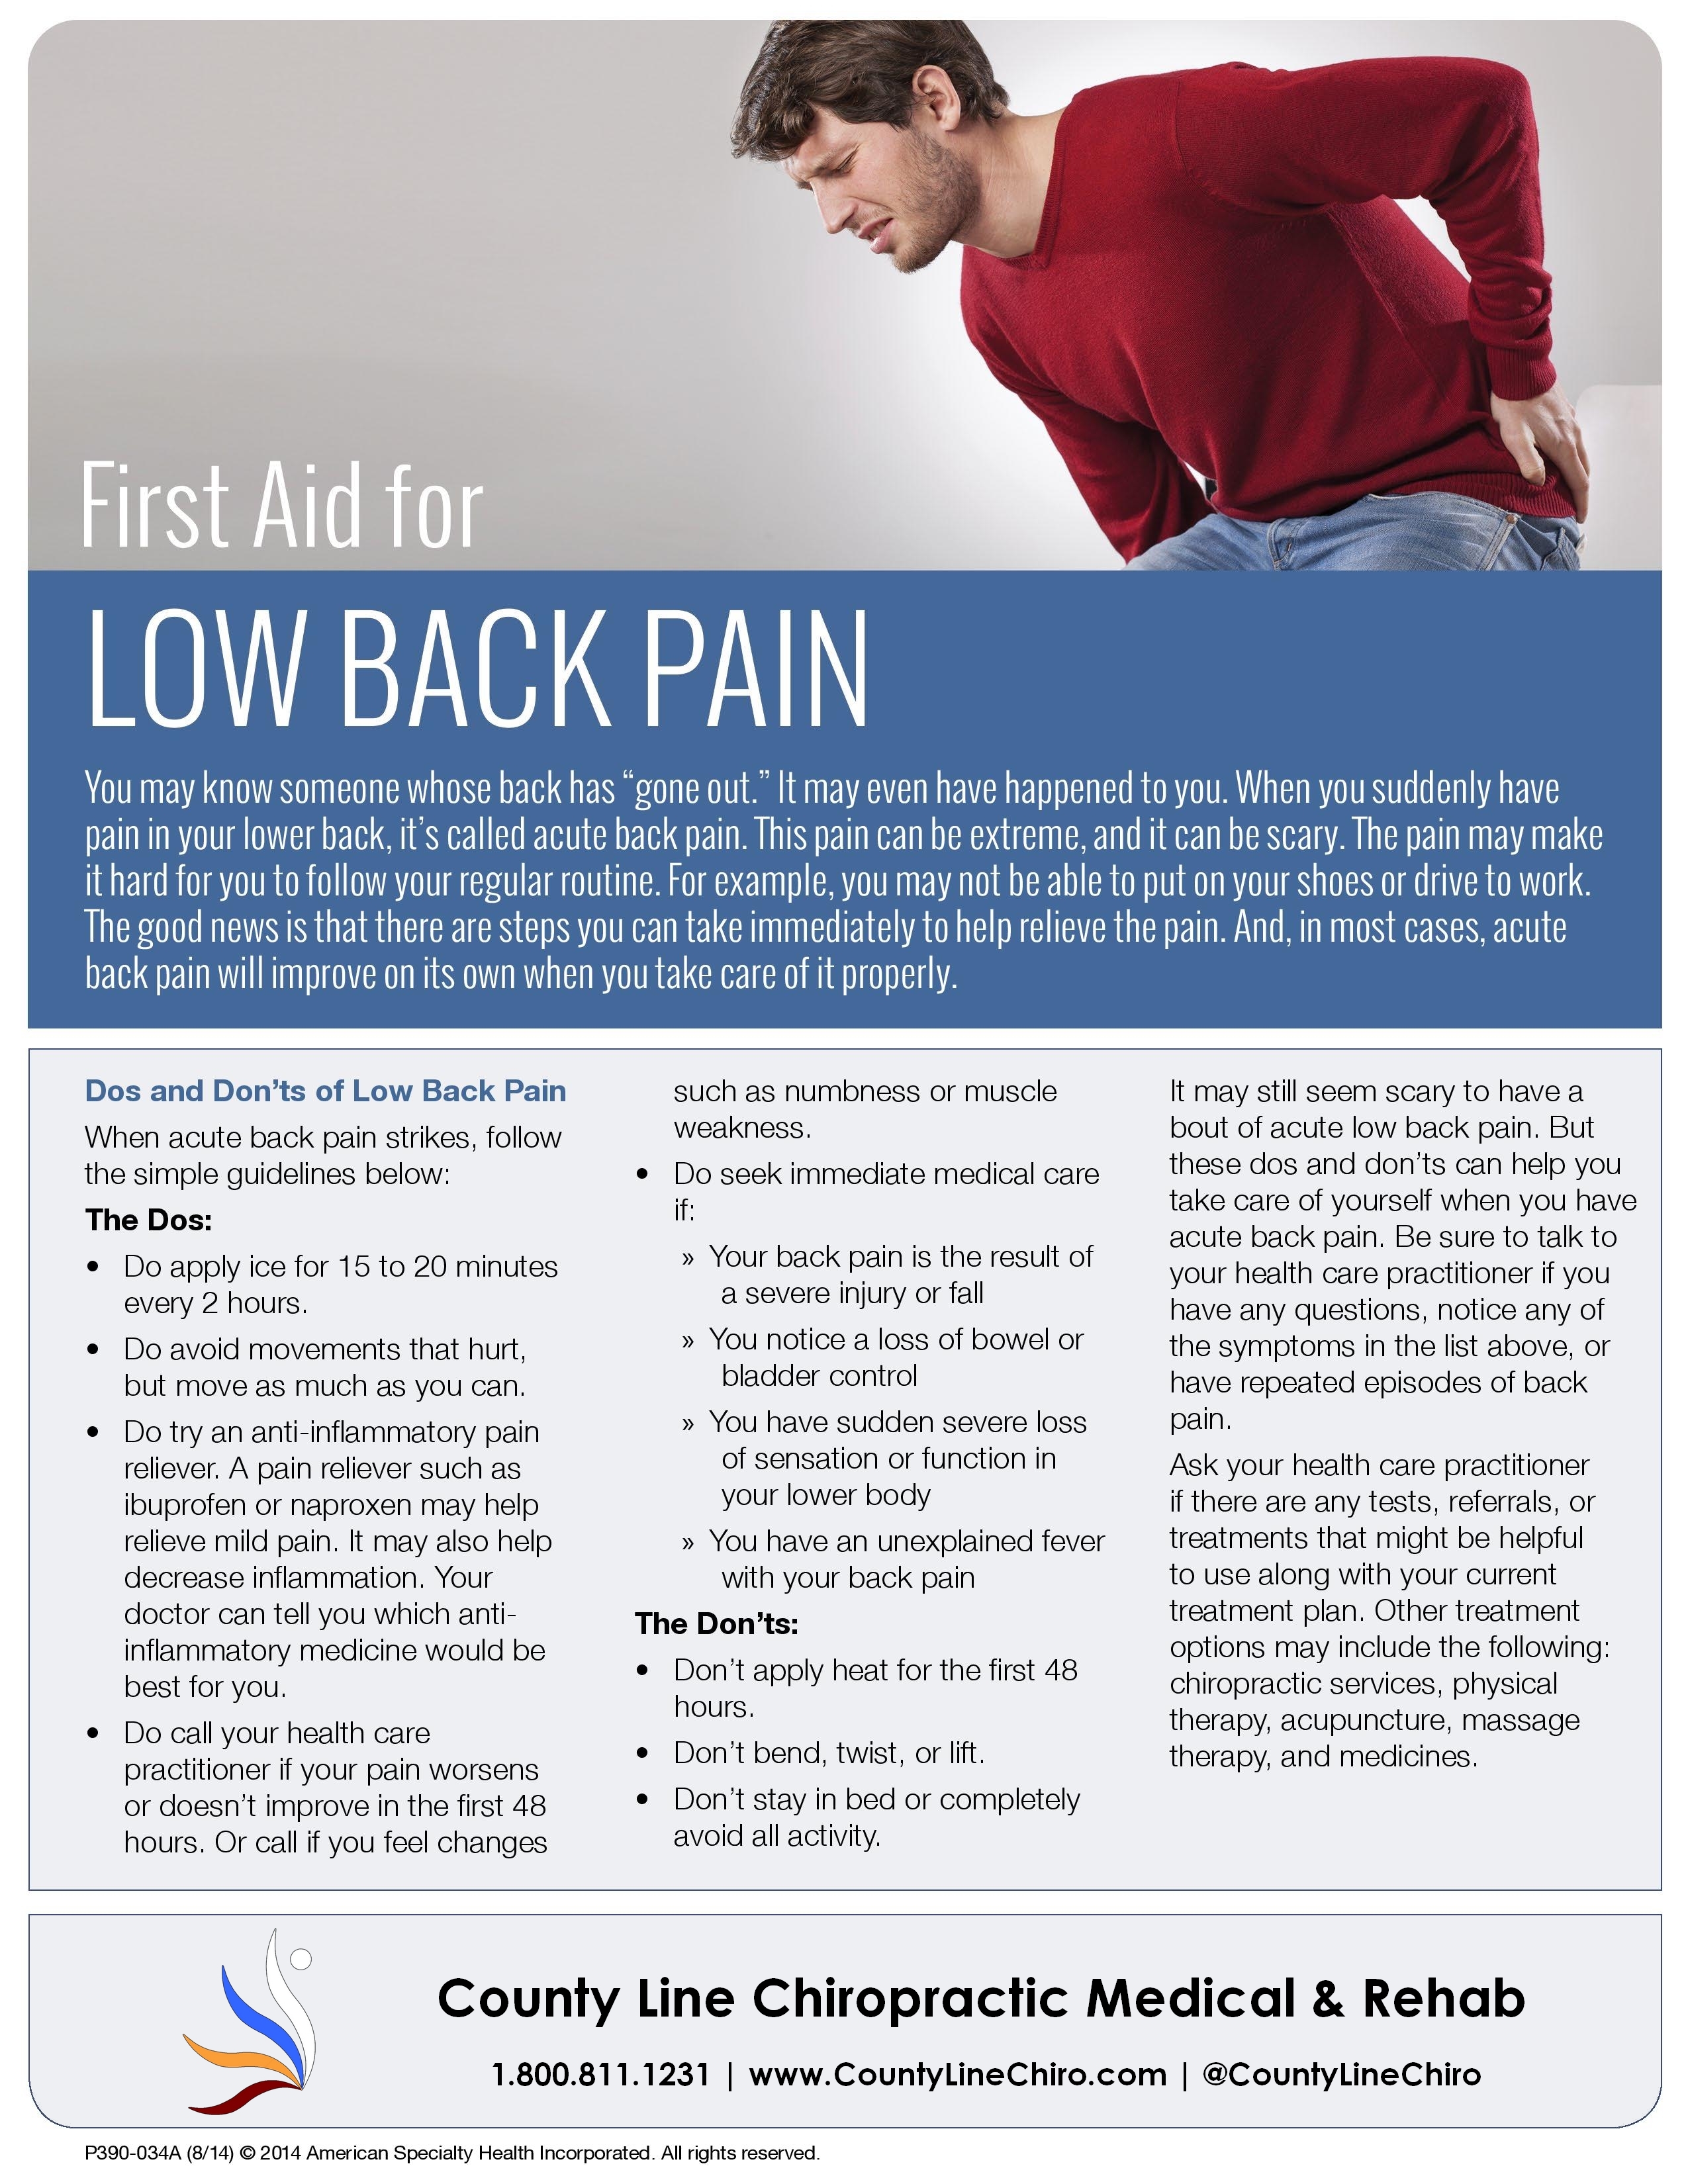 Relieve Low Back Pain with Effective Treatment